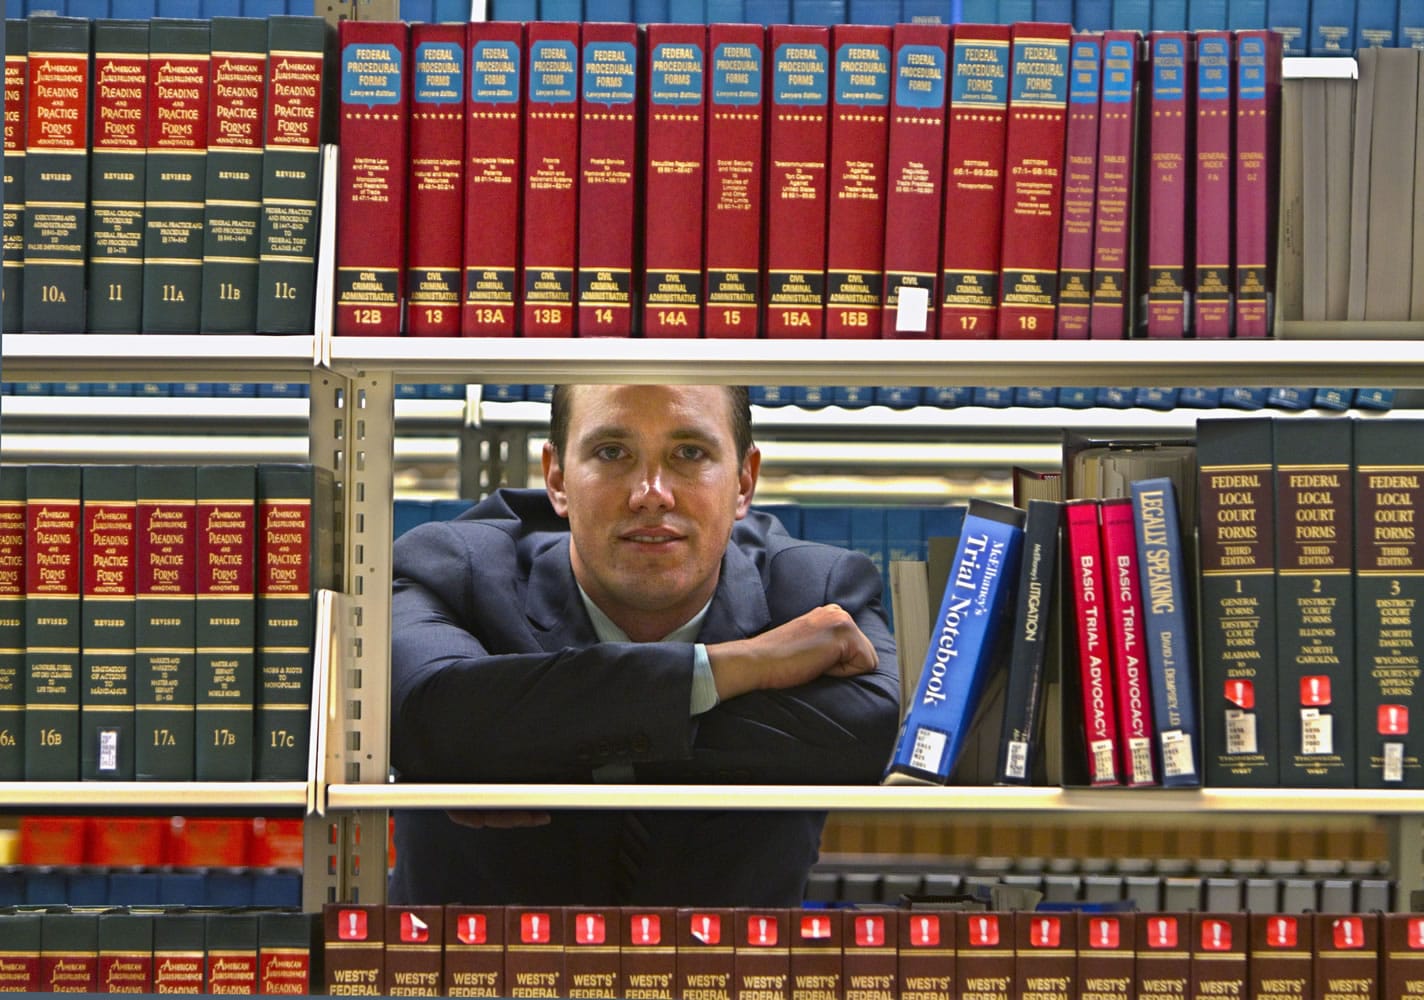 Shon Hopwood, 37, who served 10 years behind bars for bank robbery, plans to spend the next few years among the books at the University of Washington School of Law library in Seattle.